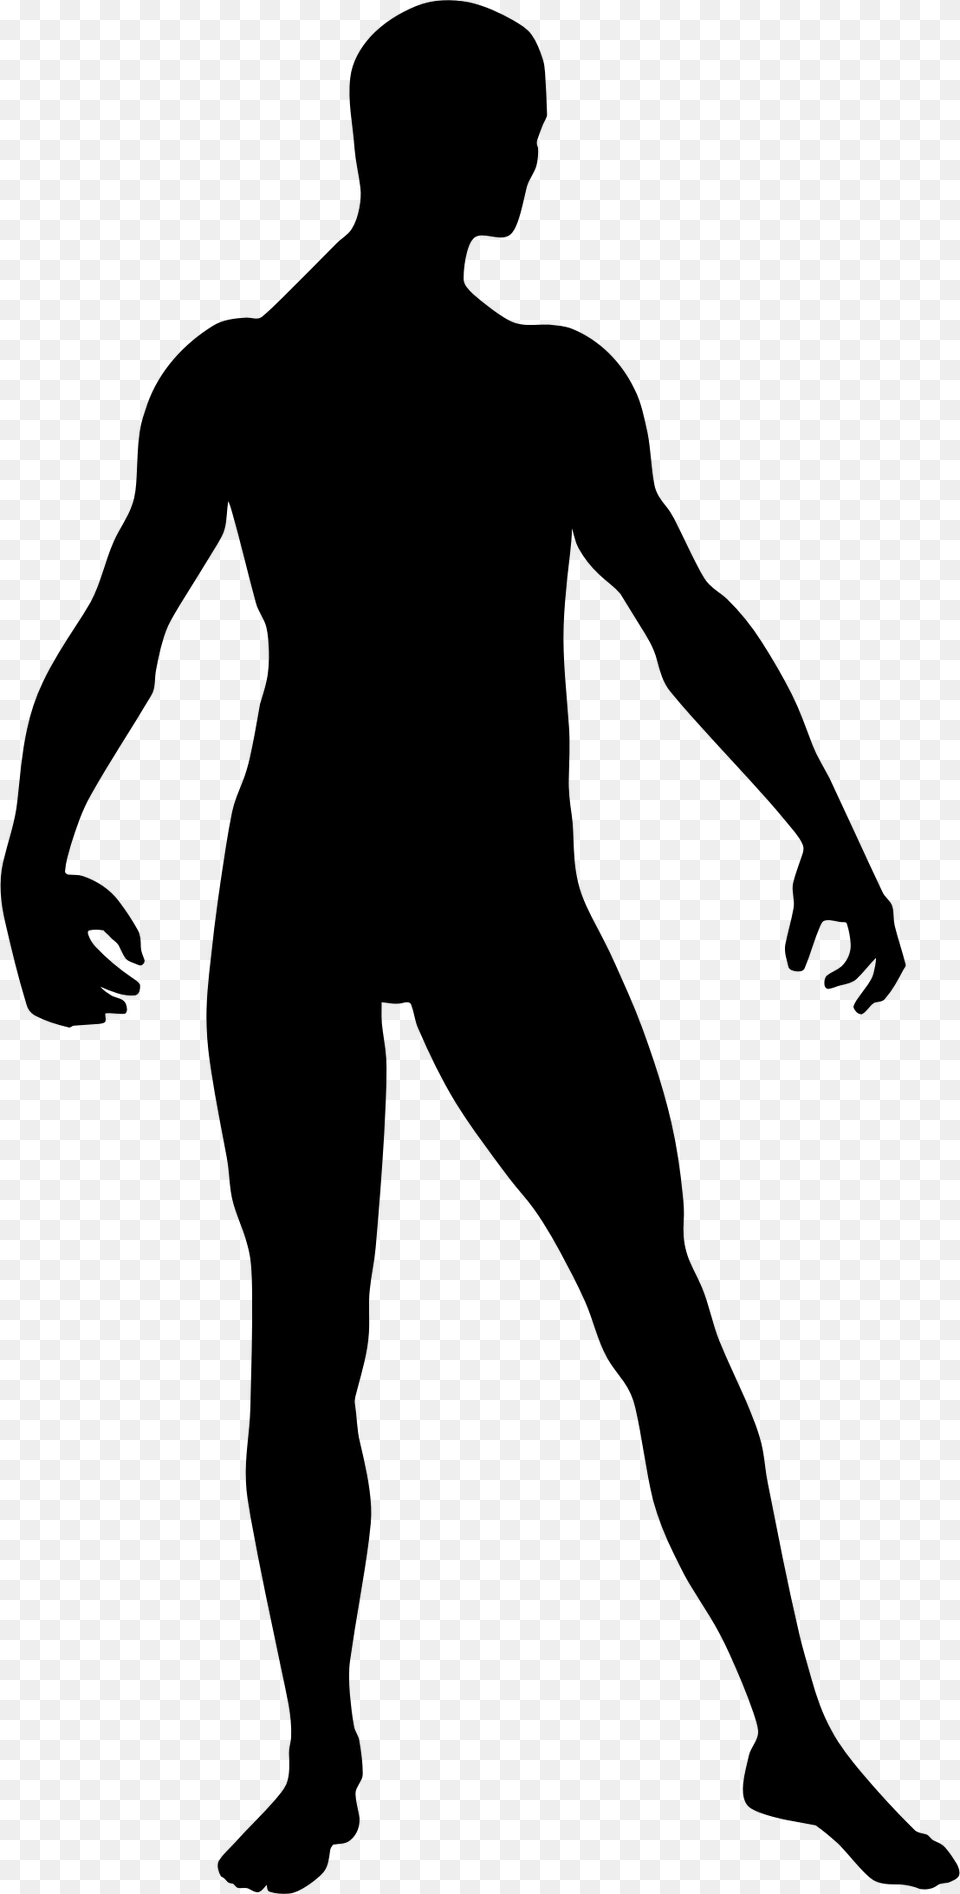 Transparent Man Praying Silhouette Areas To Target In A Fight, Gray Png